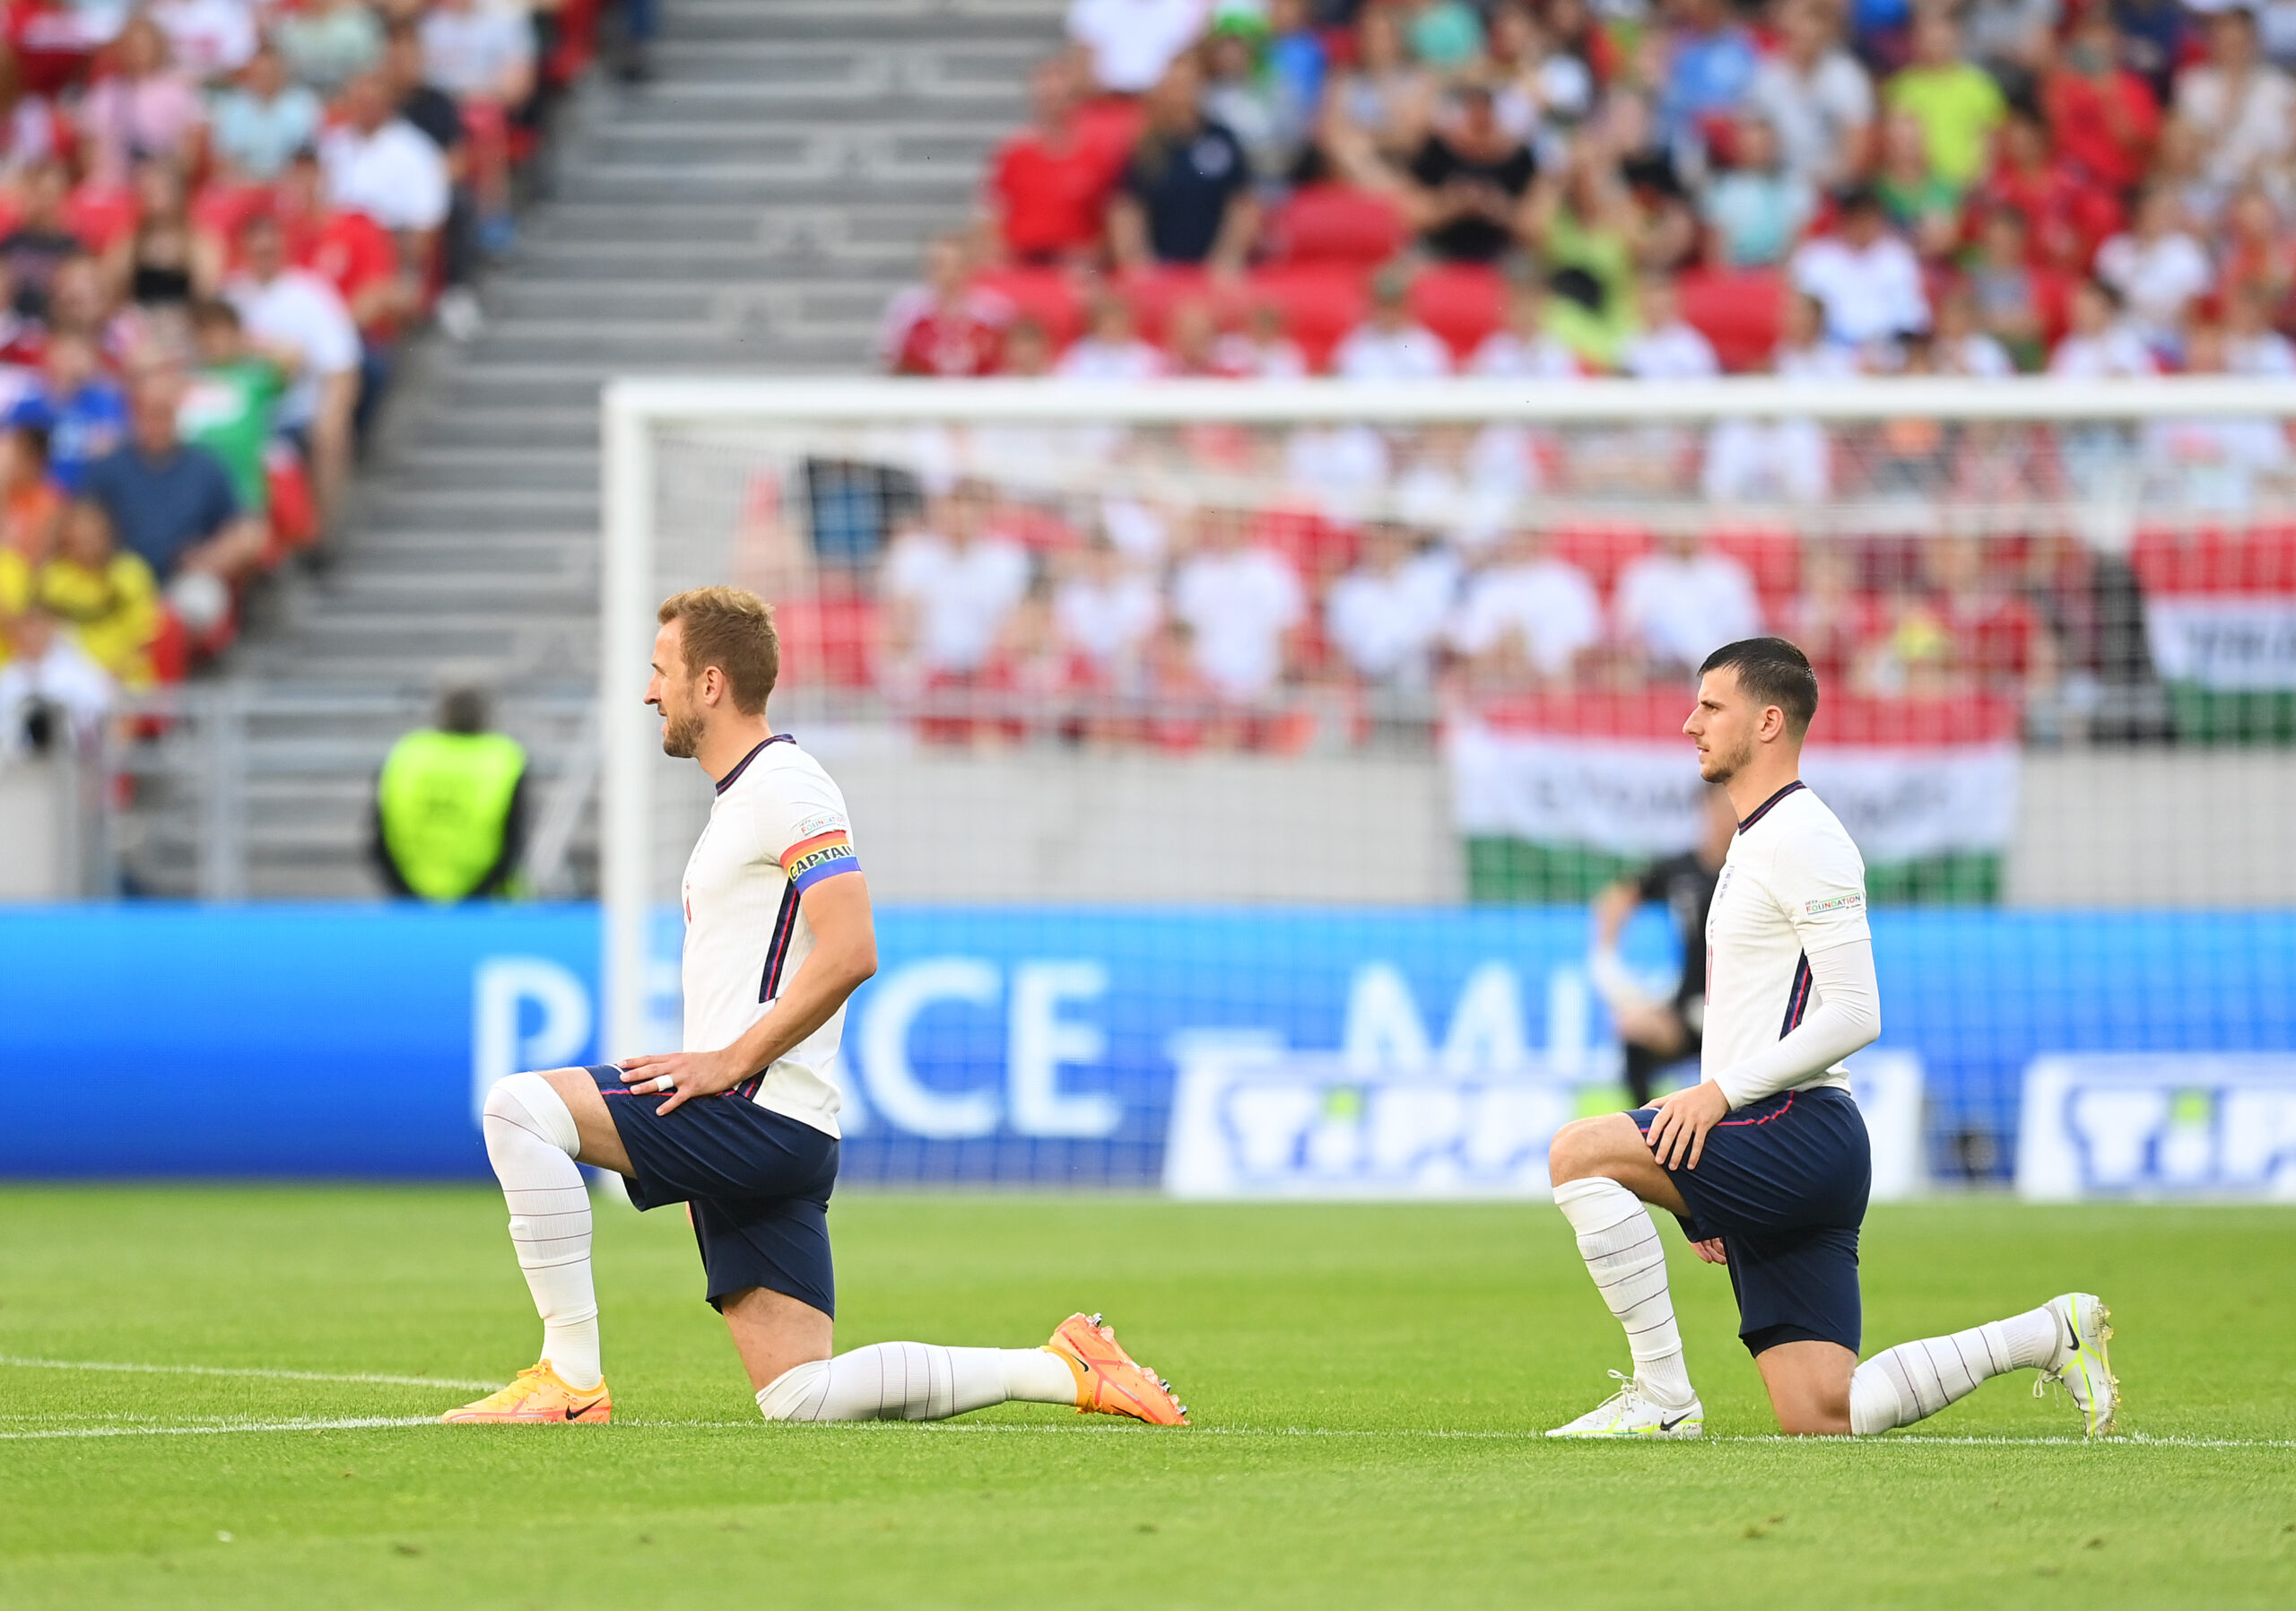 England takes a knee to fight against discrimination and racism